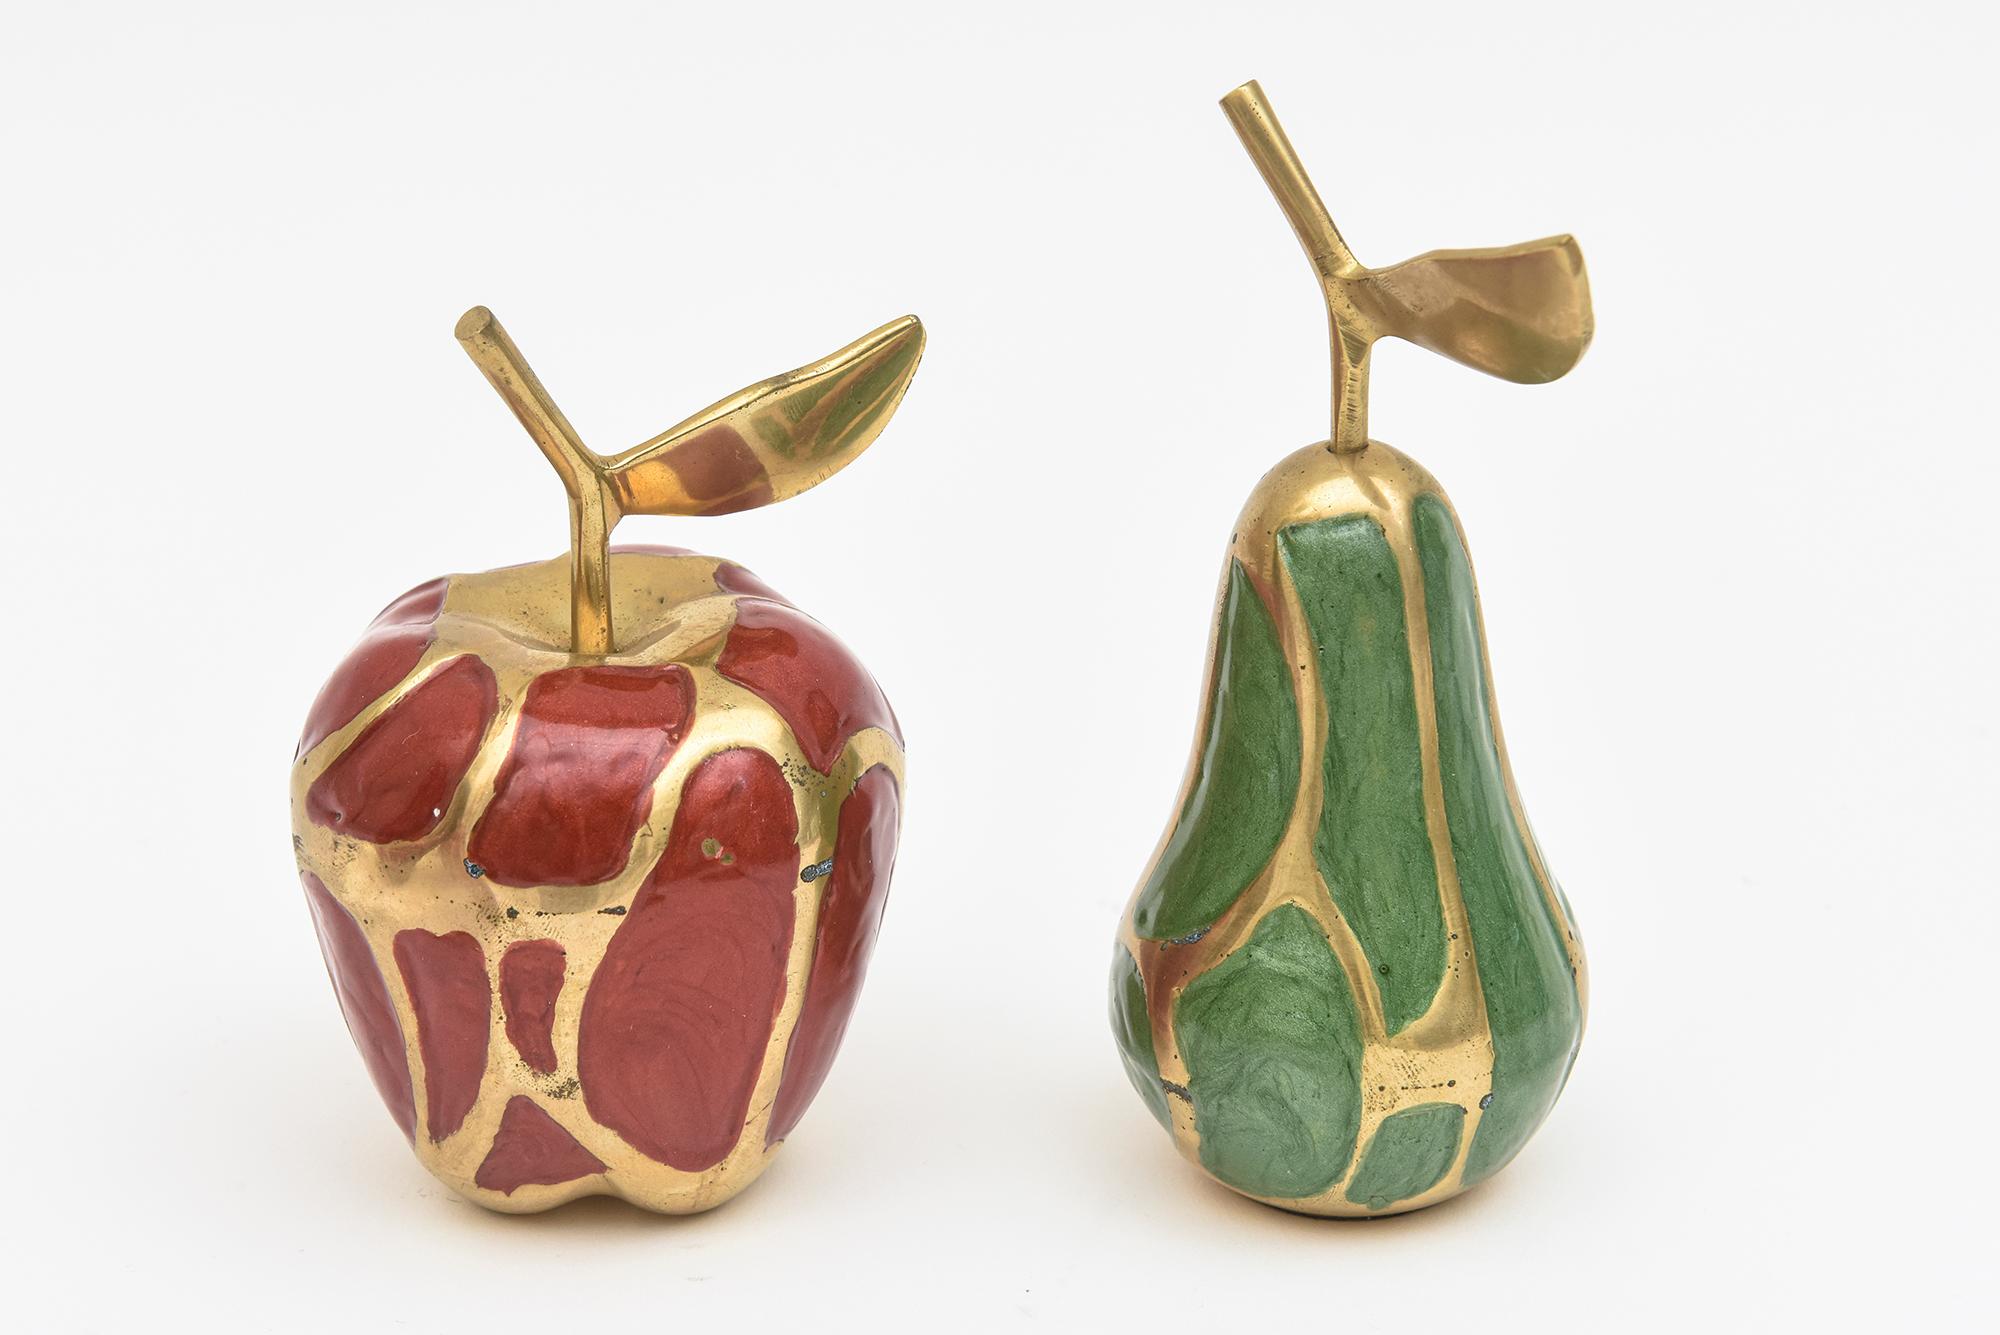 Enamel and Brass Red , Green Apple and Pear Object Sculptures Set Of 6 Vintage In Good Condition For Sale In North Miami, FL